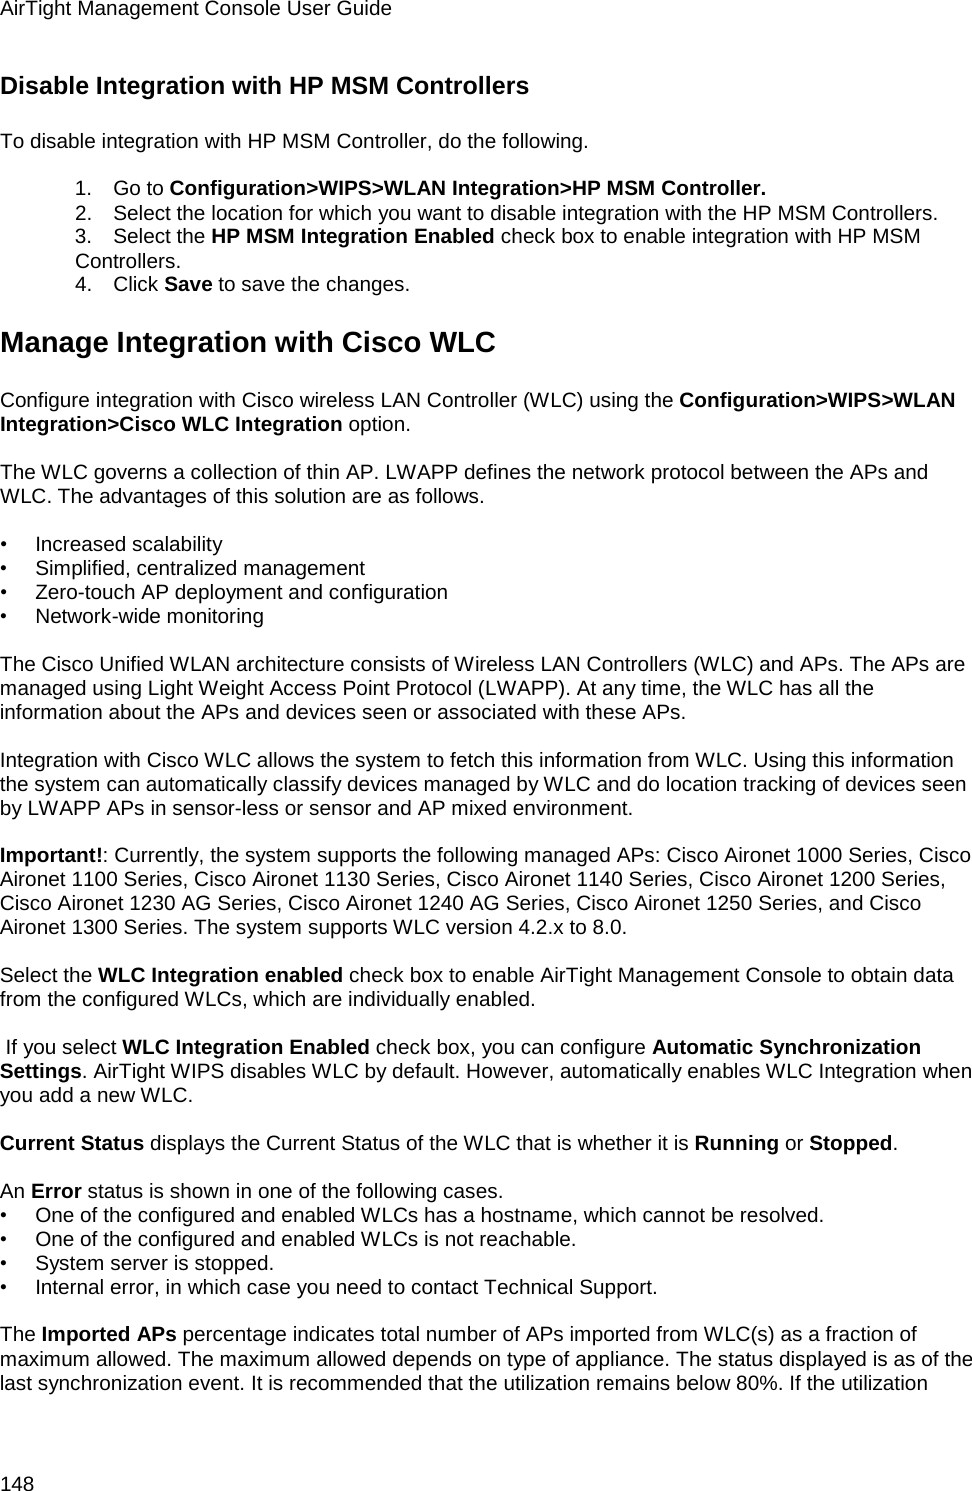 AirTight Management Console User Guide 148 Disable Integration with HP MSM Controllers To disable integration with HP MSM Controller, do the following.    1.      Go to Configuration&gt;WIPS&gt;WLAN Integration&gt;HP MSM Controller. 2.      Select the location for which you want to disable integration with the HP MSM Controllers. 3.      Select the HP MSM Integration Enabled check box to enable integration with HP MSM Controllers. 4.      Click Save to save the changes. Manage Integration with Cisco WLC Configure integration with Cisco wireless LAN Controller (WLC) using the Configuration&gt;WIPS&gt;WLAN Integration&gt;Cisco WLC Integration option.   The WLC governs a collection of thin AP. LWAPP defines the network protocol between the APs and WLC. The advantages of this solution are as follows.   •        Increased scalability •        Simplified, centralized management •        Zero-touch AP deployment and configuration •        Network-wide monitoring   The Cisco Unified WLAN architecture consists of Wireless LAN Controllers (WLC) and APs. The APs are managed using Light Weight Access Point Protocol (LWAPP). At any time, the WLC has all the information about the APs and devices seen or associated with these APs.   Integration with Cisco WLC allows the system to fetch this information from WLC. Using this information the system can automatically classify devices managed by WLC and do location tracking of devices seen by LWAPP APs in sensor-less or sensor and AP mixed environment.   Important!: Currently, the system supports the following managed APs: Cisco Aironet 1000 Series, Cisco Aironet 1100 Series, Cisco Aironet 1130 Series, Cisco Aironet 1140 Series, Cisco Aironet 1200 Series, Cisco Aironet 1230 AG Series, Cisco Aironet 1240 AG Series, Cisco Aironet 1250 Series, and Cisco Aironet 1300 Series. The system supports WLC version 4.2.x to 8.0.   Select the WLC Integration enabled check box to enable AirTight Management Console to obtain data from the configured WLCs, which are individually enabled.    If you select WLC Integration Enabled check box, you can configure Automatic Synchronization Settings. AirTight WIPS disables WLC by default. However, automatically enables WLC Integration when you add a new WLC.   Current Status displays the Current Status of the WLC that is whether it is Running or Stopped.    An Error status is shown in one of the following cases. •        One of the configured and enabled WLCs has a hostname, which cannot be resolved. •        One of the configured and enabled WLCs is not reachable. •        System server is stopped. •        Internal error, in which case you need to contact Technical Support.   The Imported APs percentage indicates total number of APs imported from WLC(s) as a fraction of maximum allowed. The maximum allowed depends on type of appliance. The status displayed is as of the last synchronization event. It is recommended that the utilization remains below 80%. If the utilization 